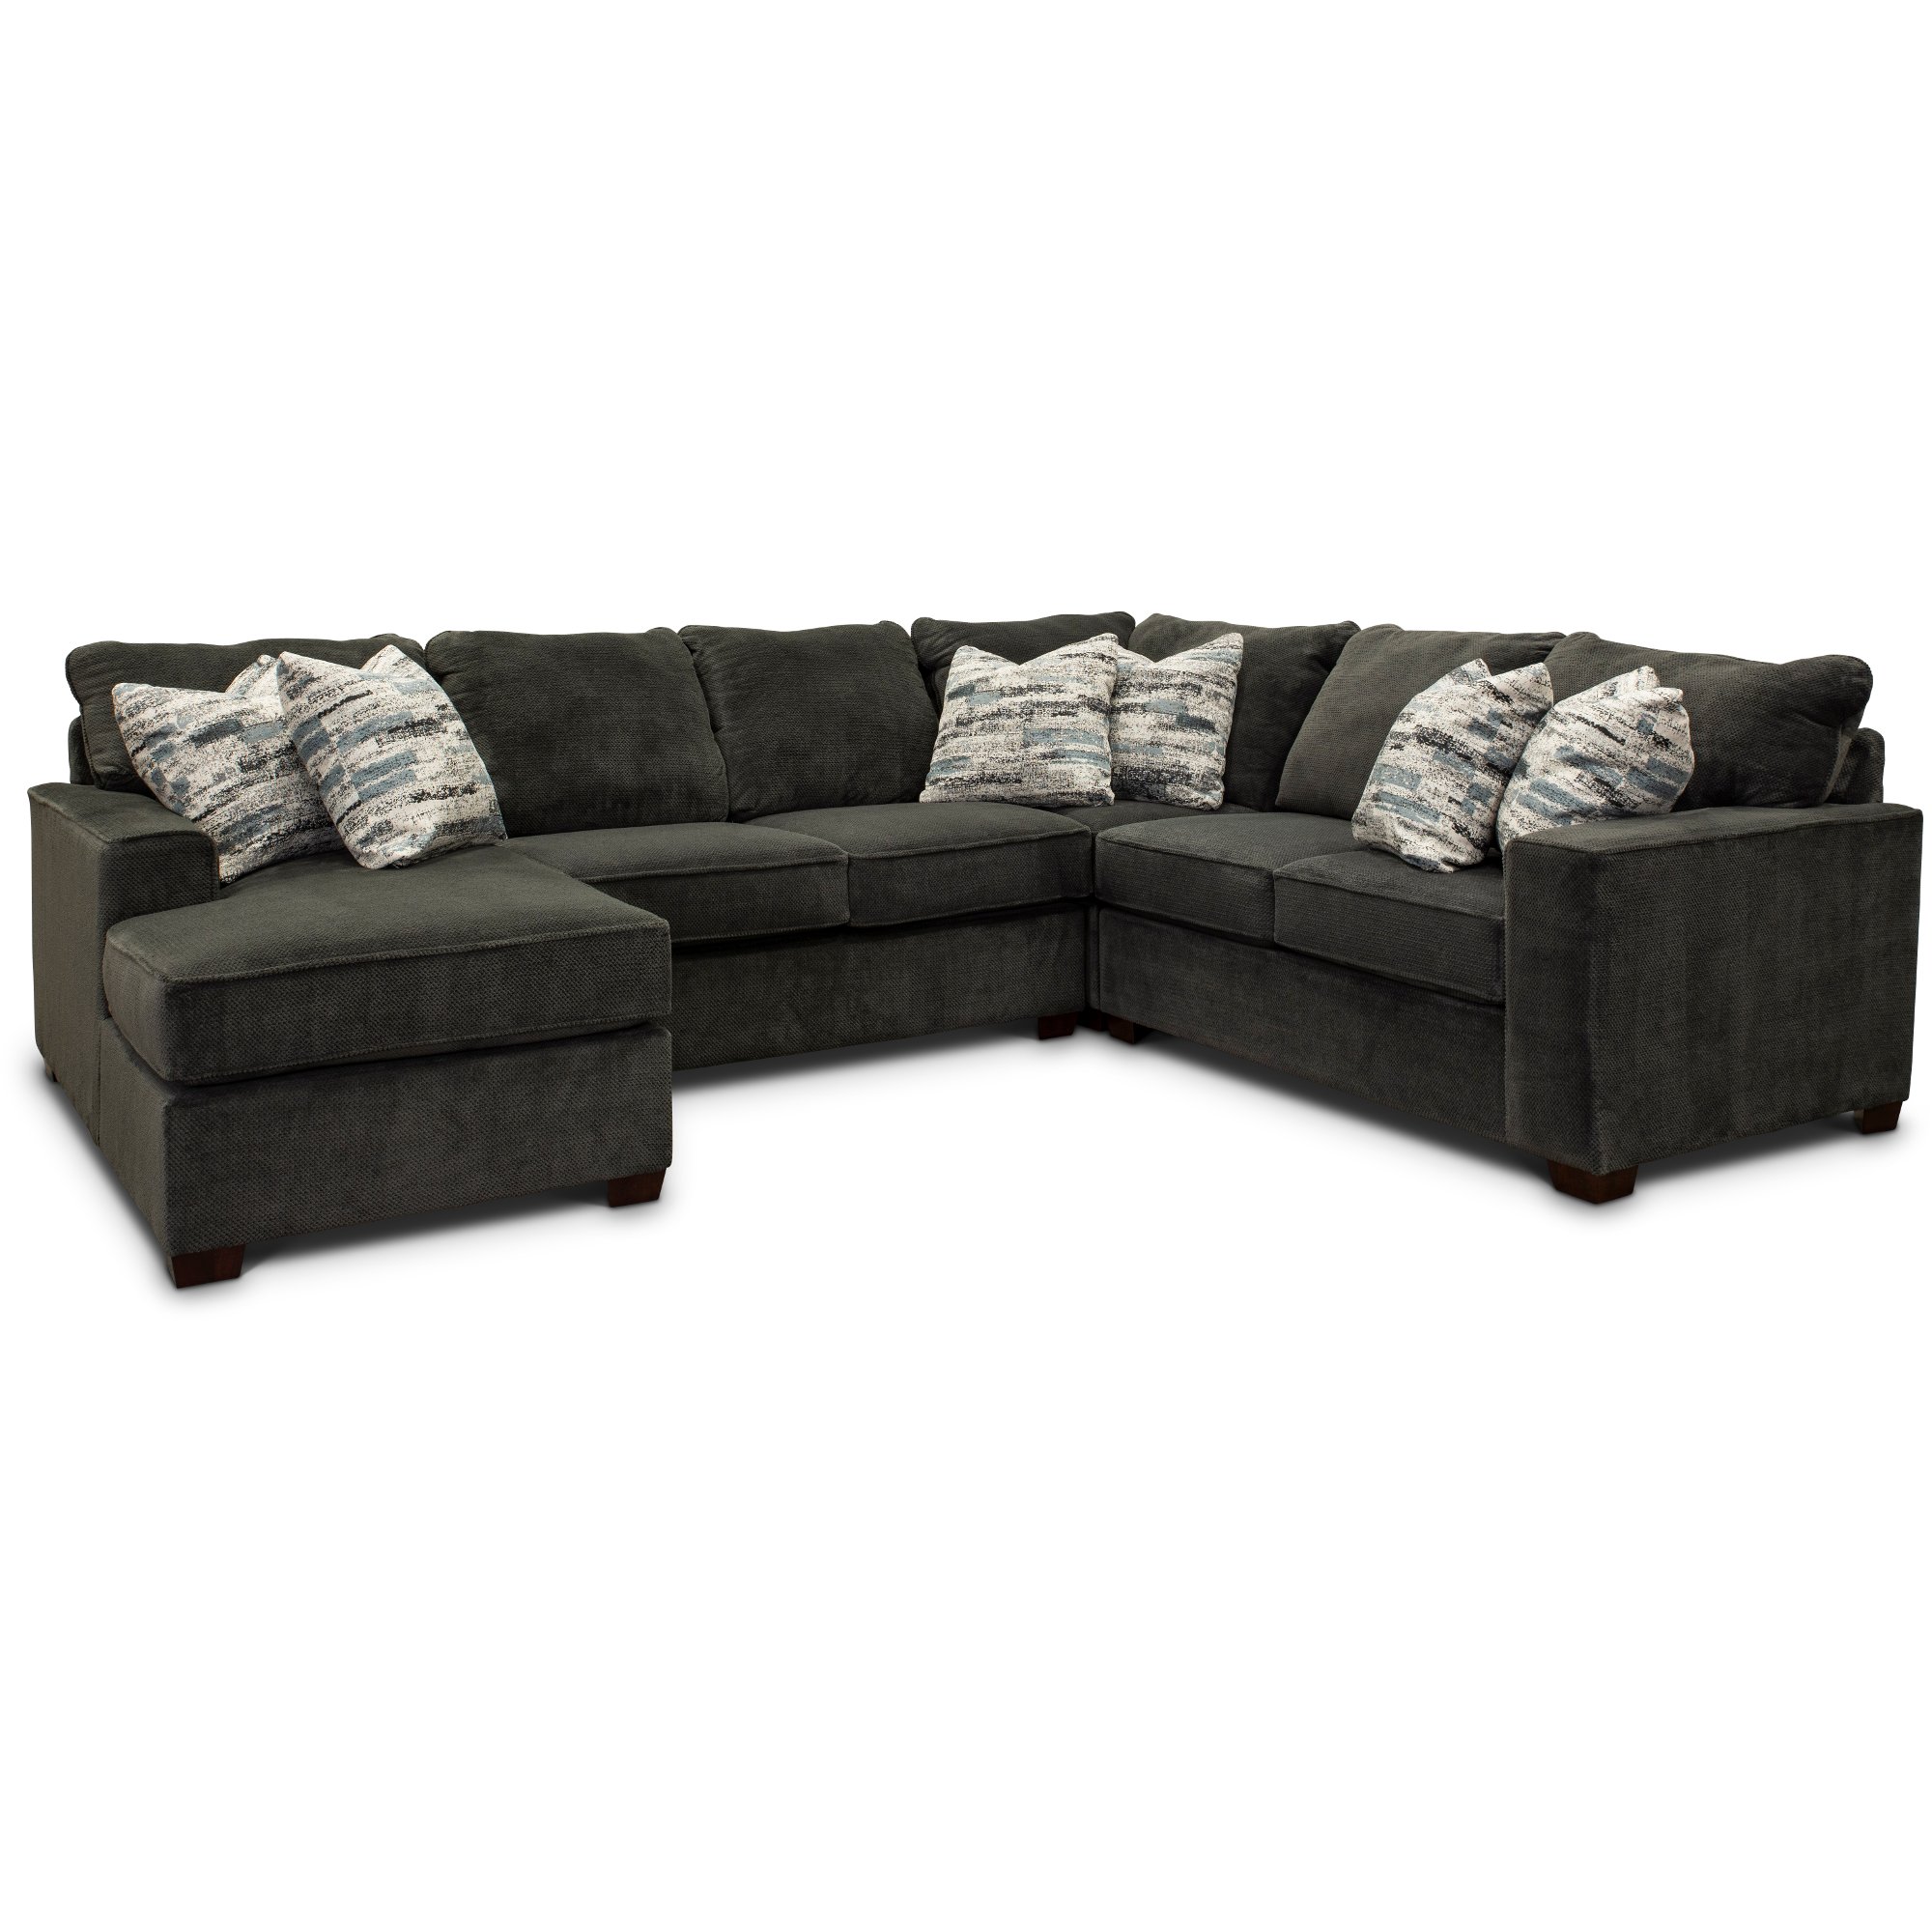 Dark Gray 4 Piece Sectional Sofa with RAF Loveseat - Autumn | RC Willey  Furniture Store